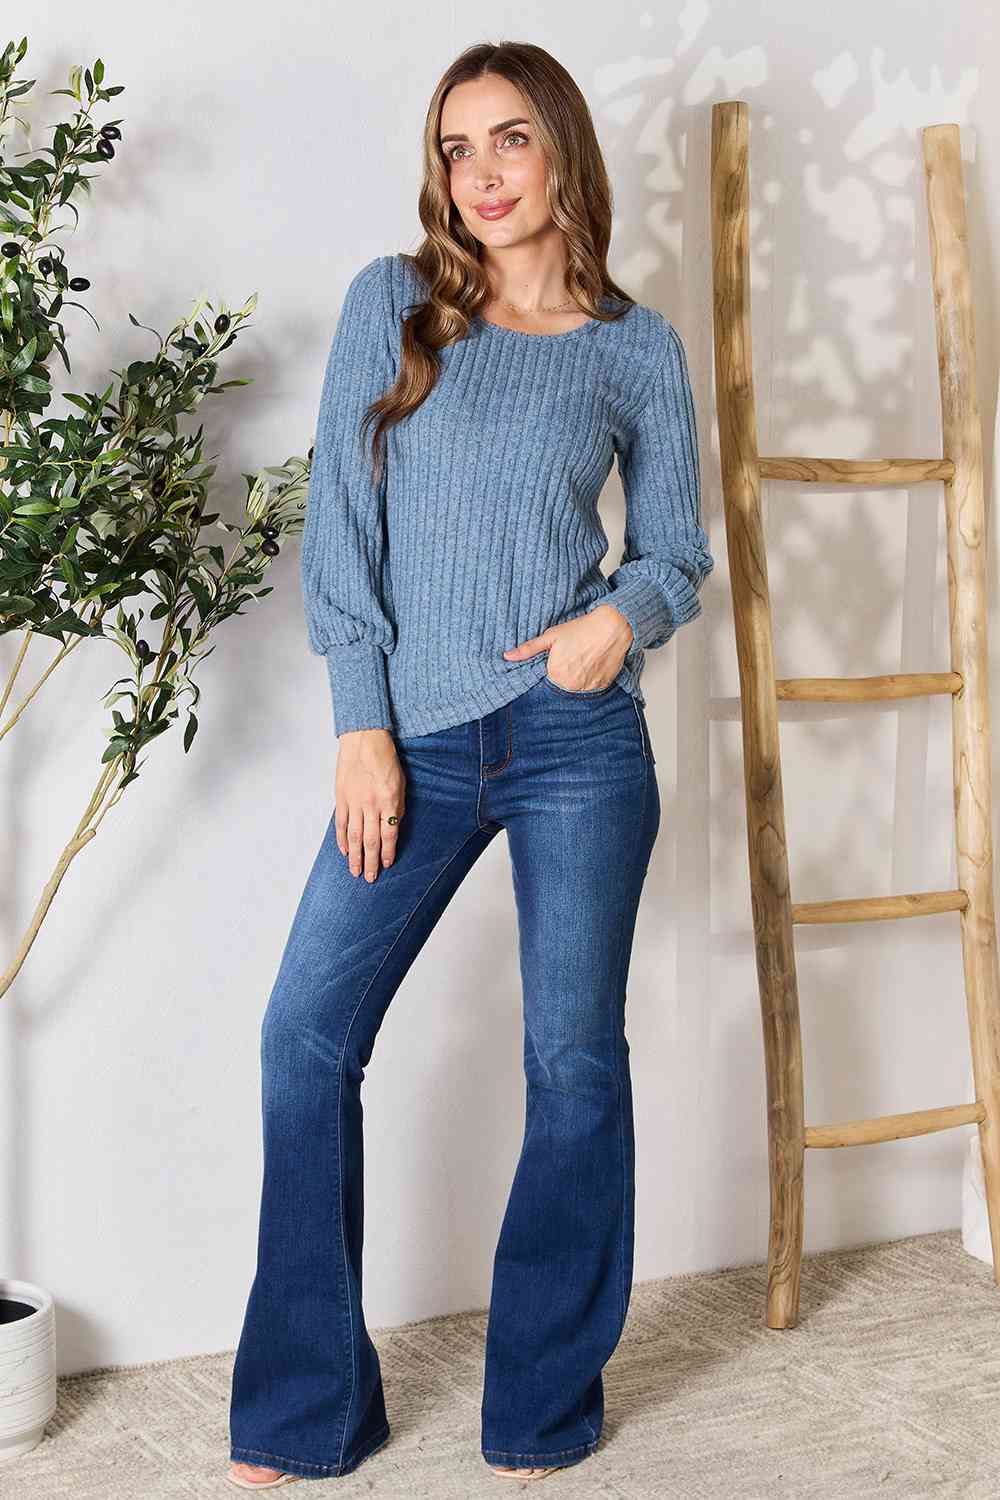 Ribbed Round Neck Lantern Sleeve Blouse - Women’s Clothing & Accessories - Shirts & Tops - 14 - 2024